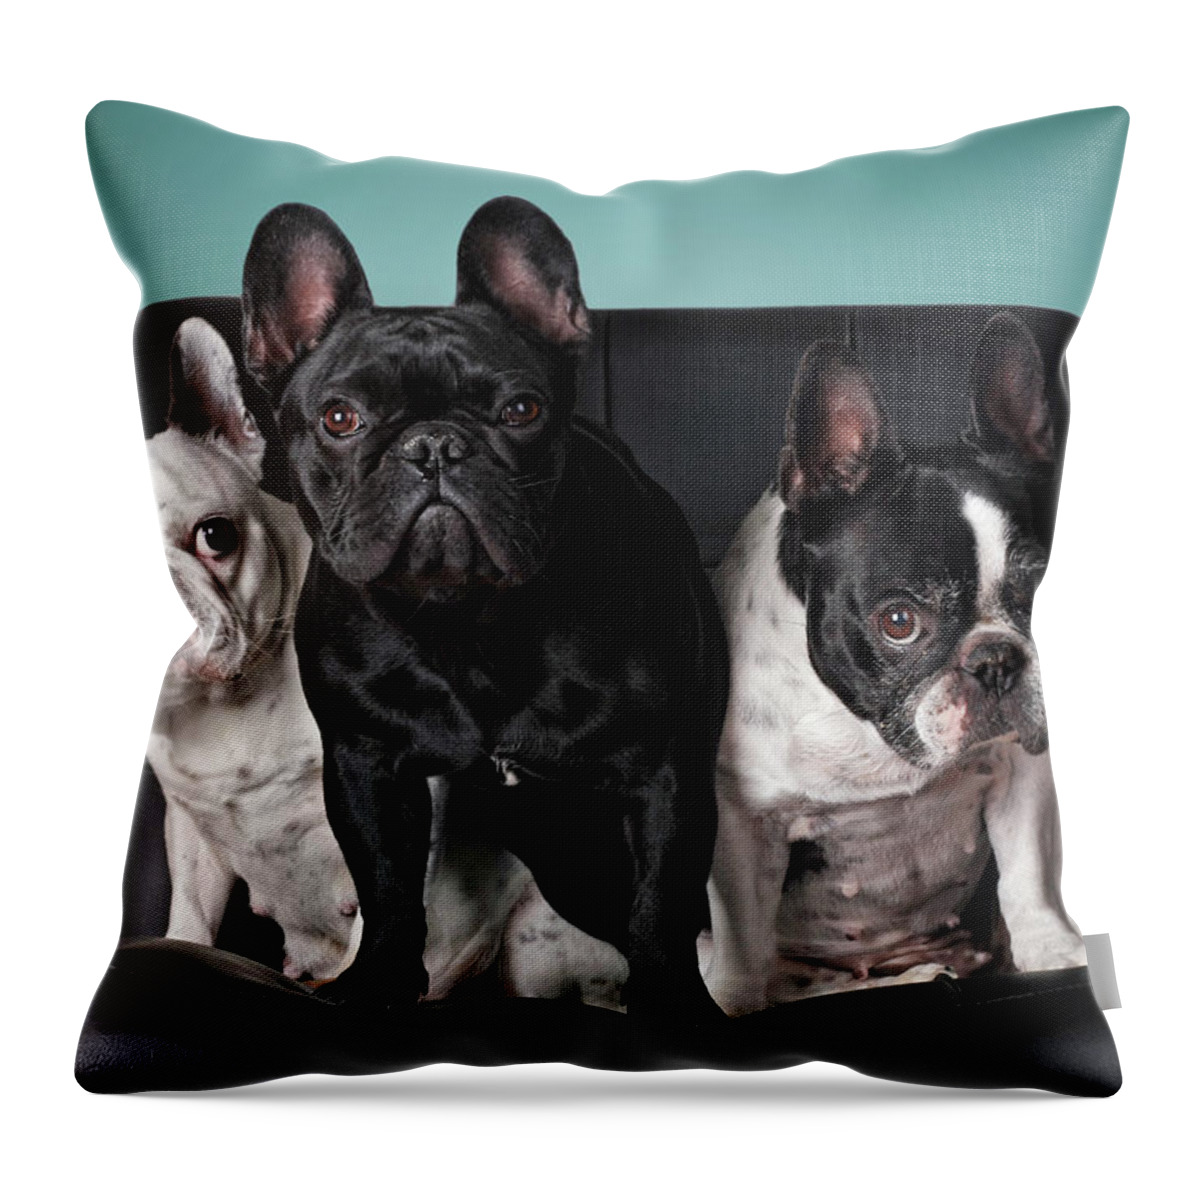 Pets Throw Pillow featuring the photograph French Bulldogs by Retales Botijero